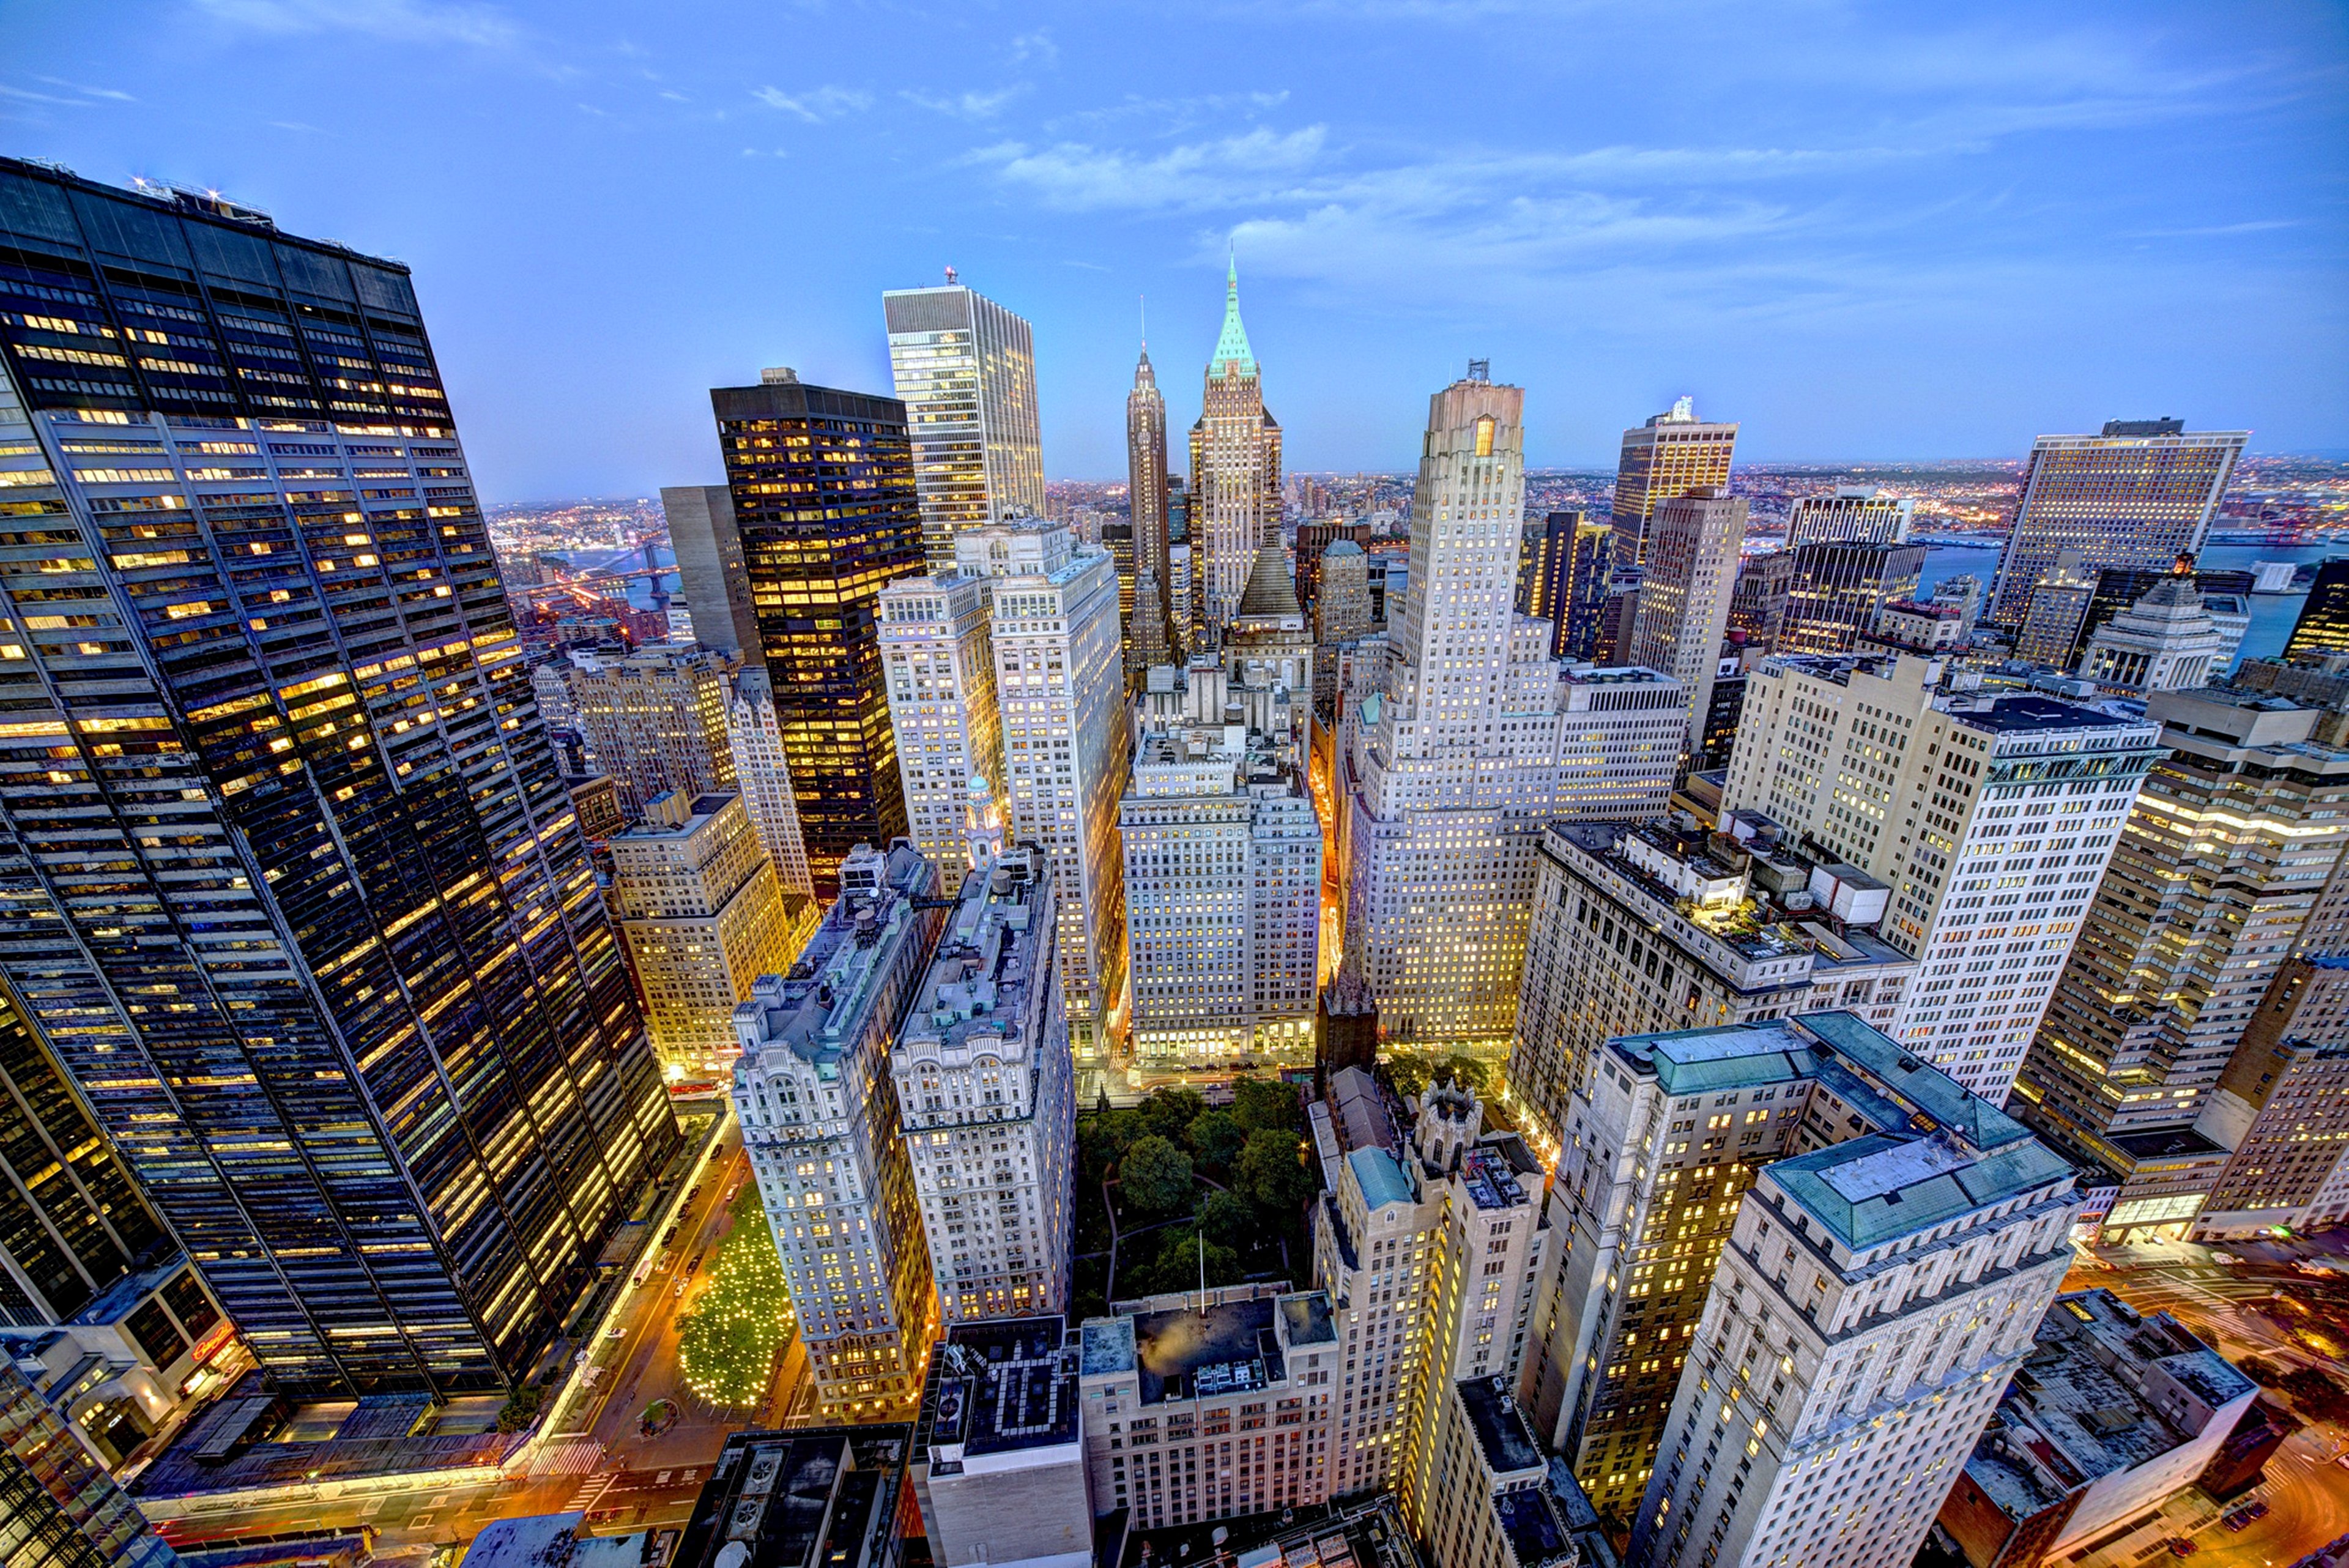 new, York, New, York, City, Lower, Manhattan, Financial, District, Chase, Plaza, Zuccotti, Park, Nyc, Usa, Skyscrapers, Houses, Buildings, Roofs, Evening, Lights, City, Landscapes Wallpaper